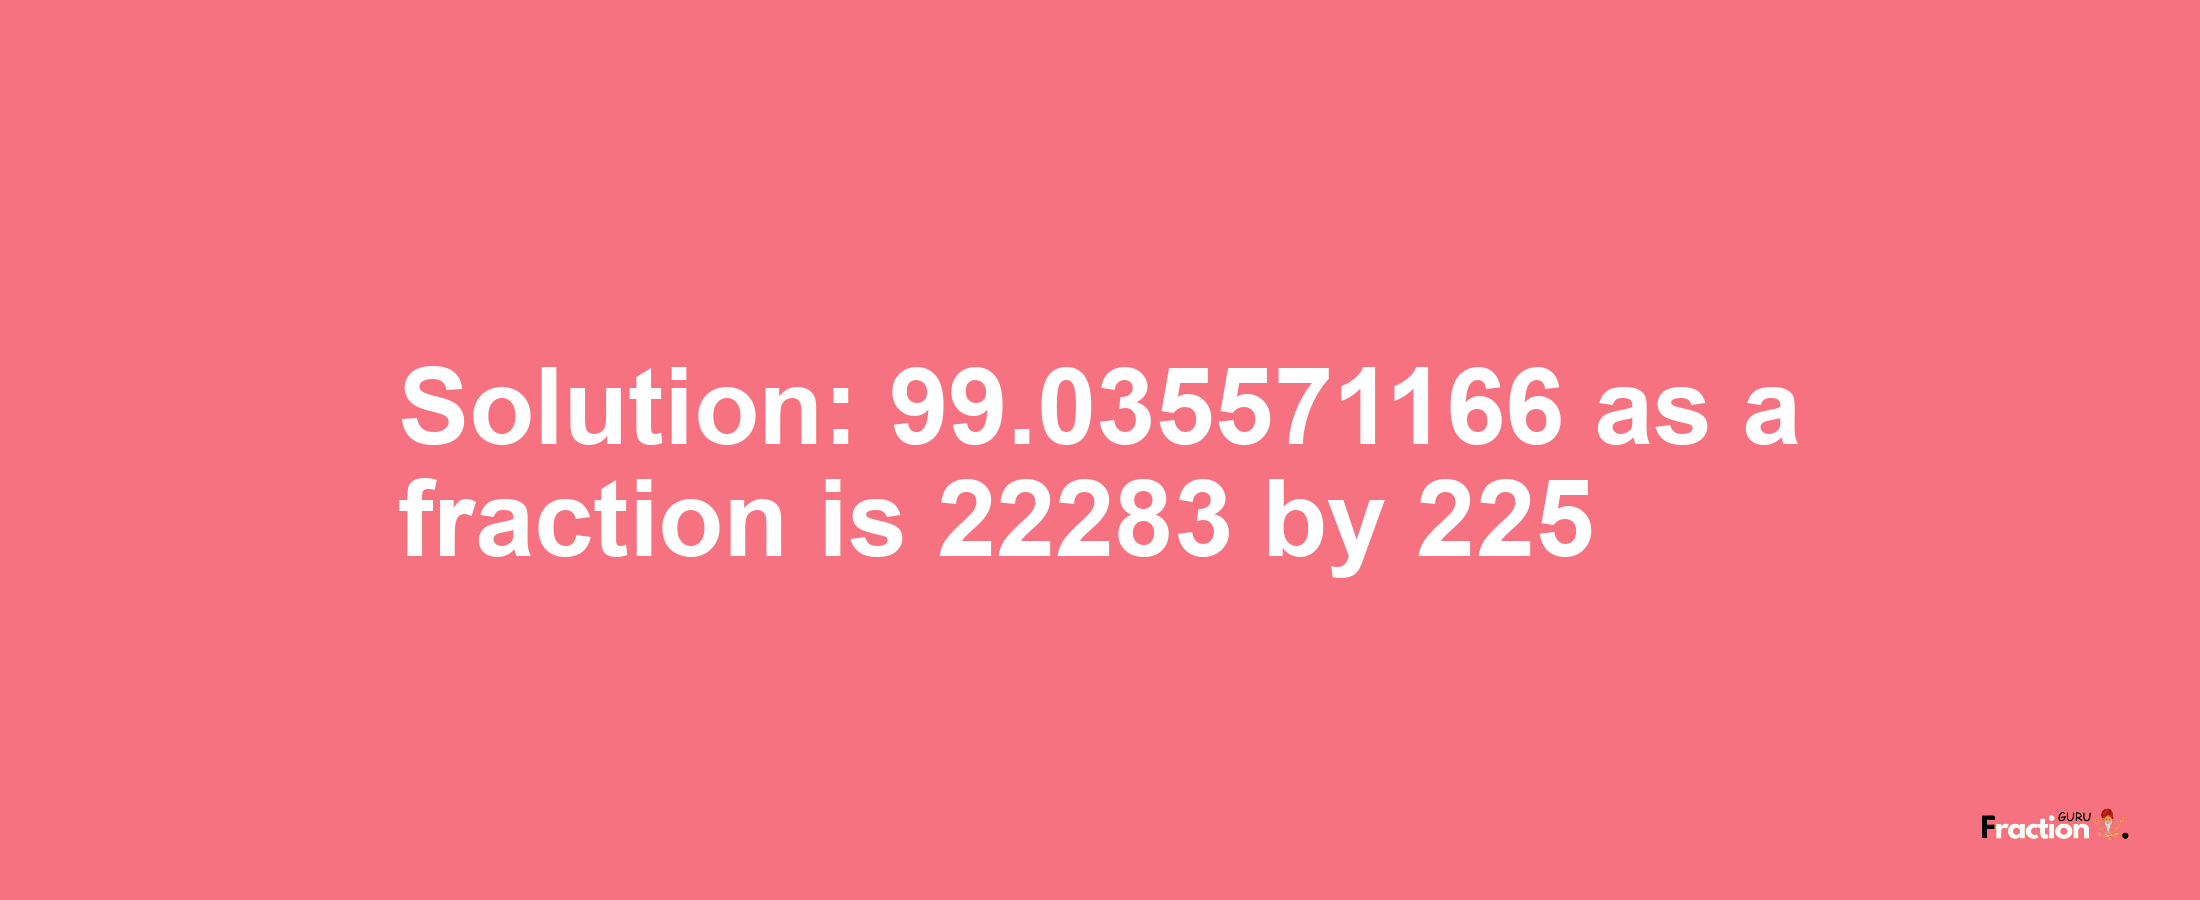 Solution:99.035571166 as a fraction is 22283/225